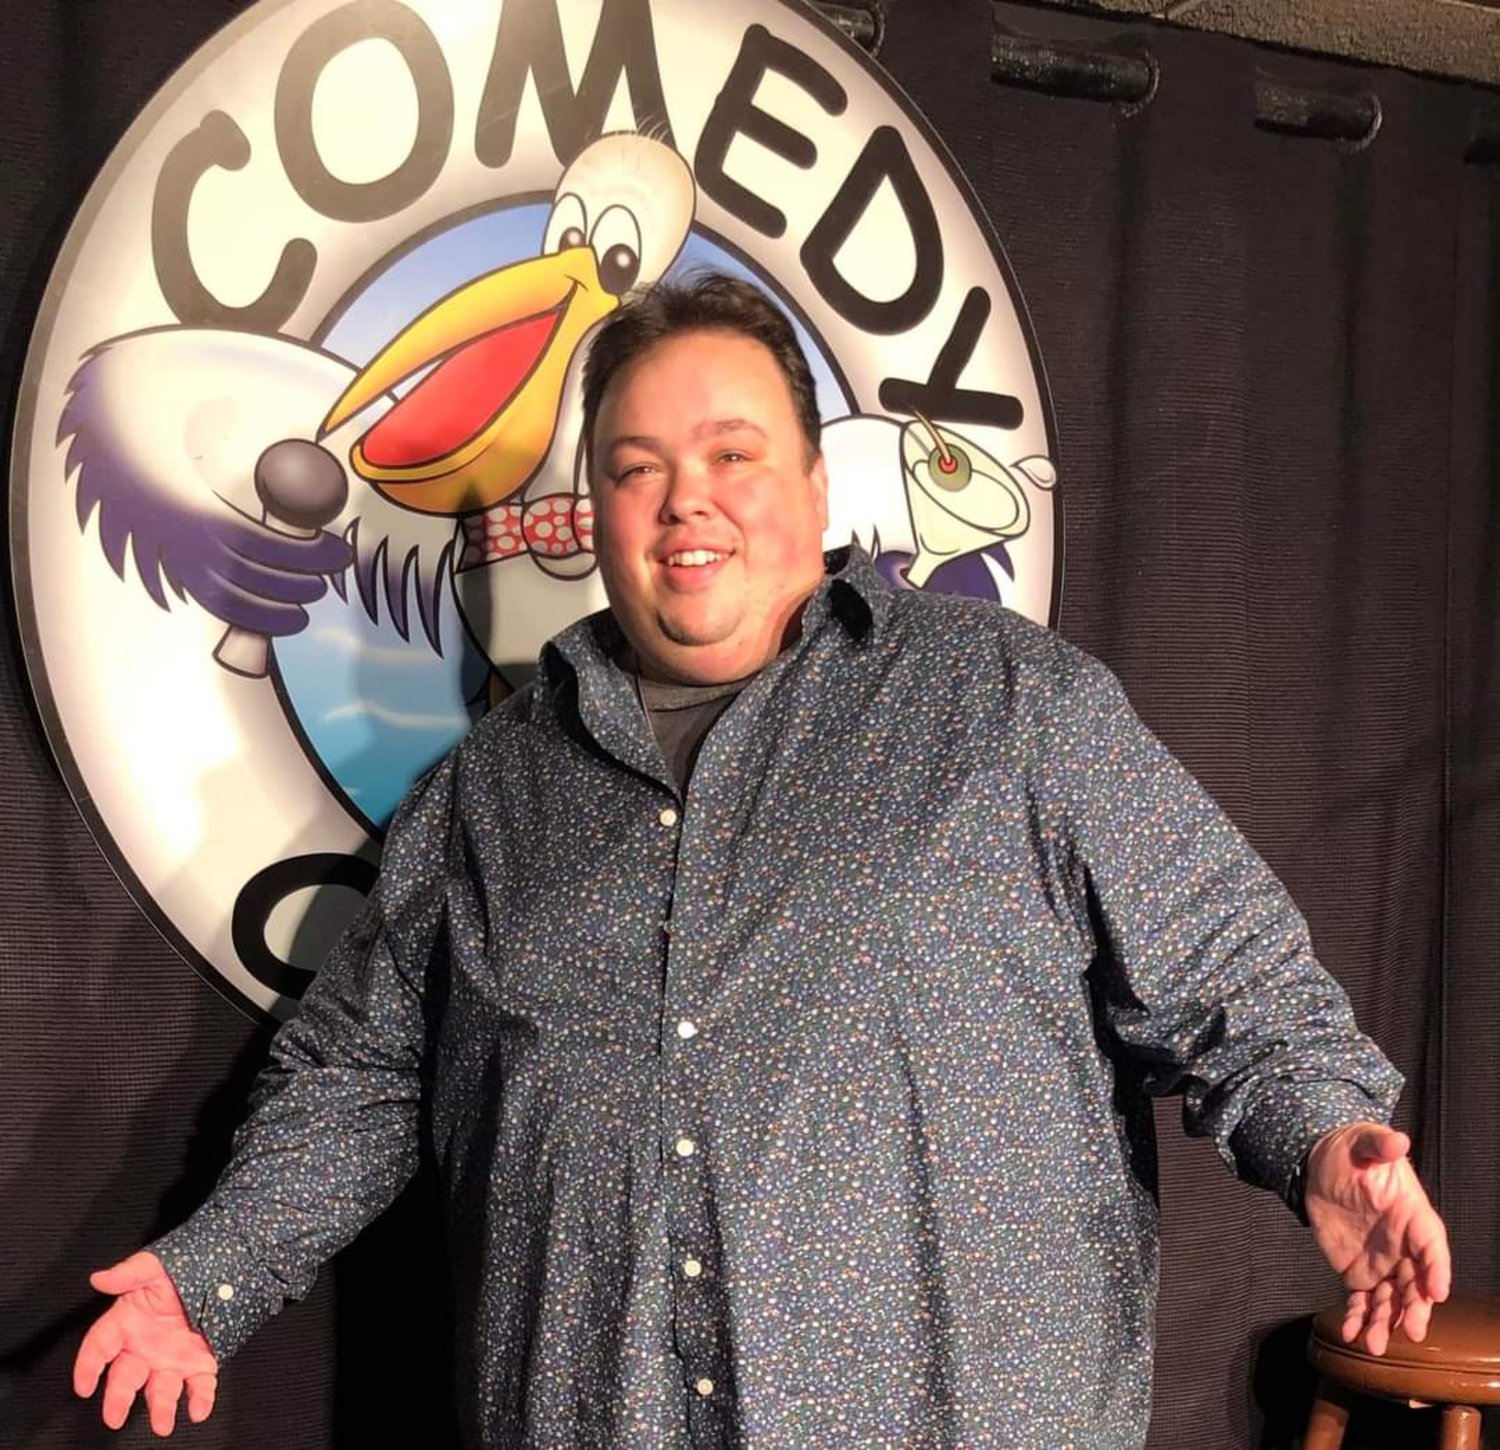 East Meadow resident Mike Keegan has been a performing comedian since 2012.